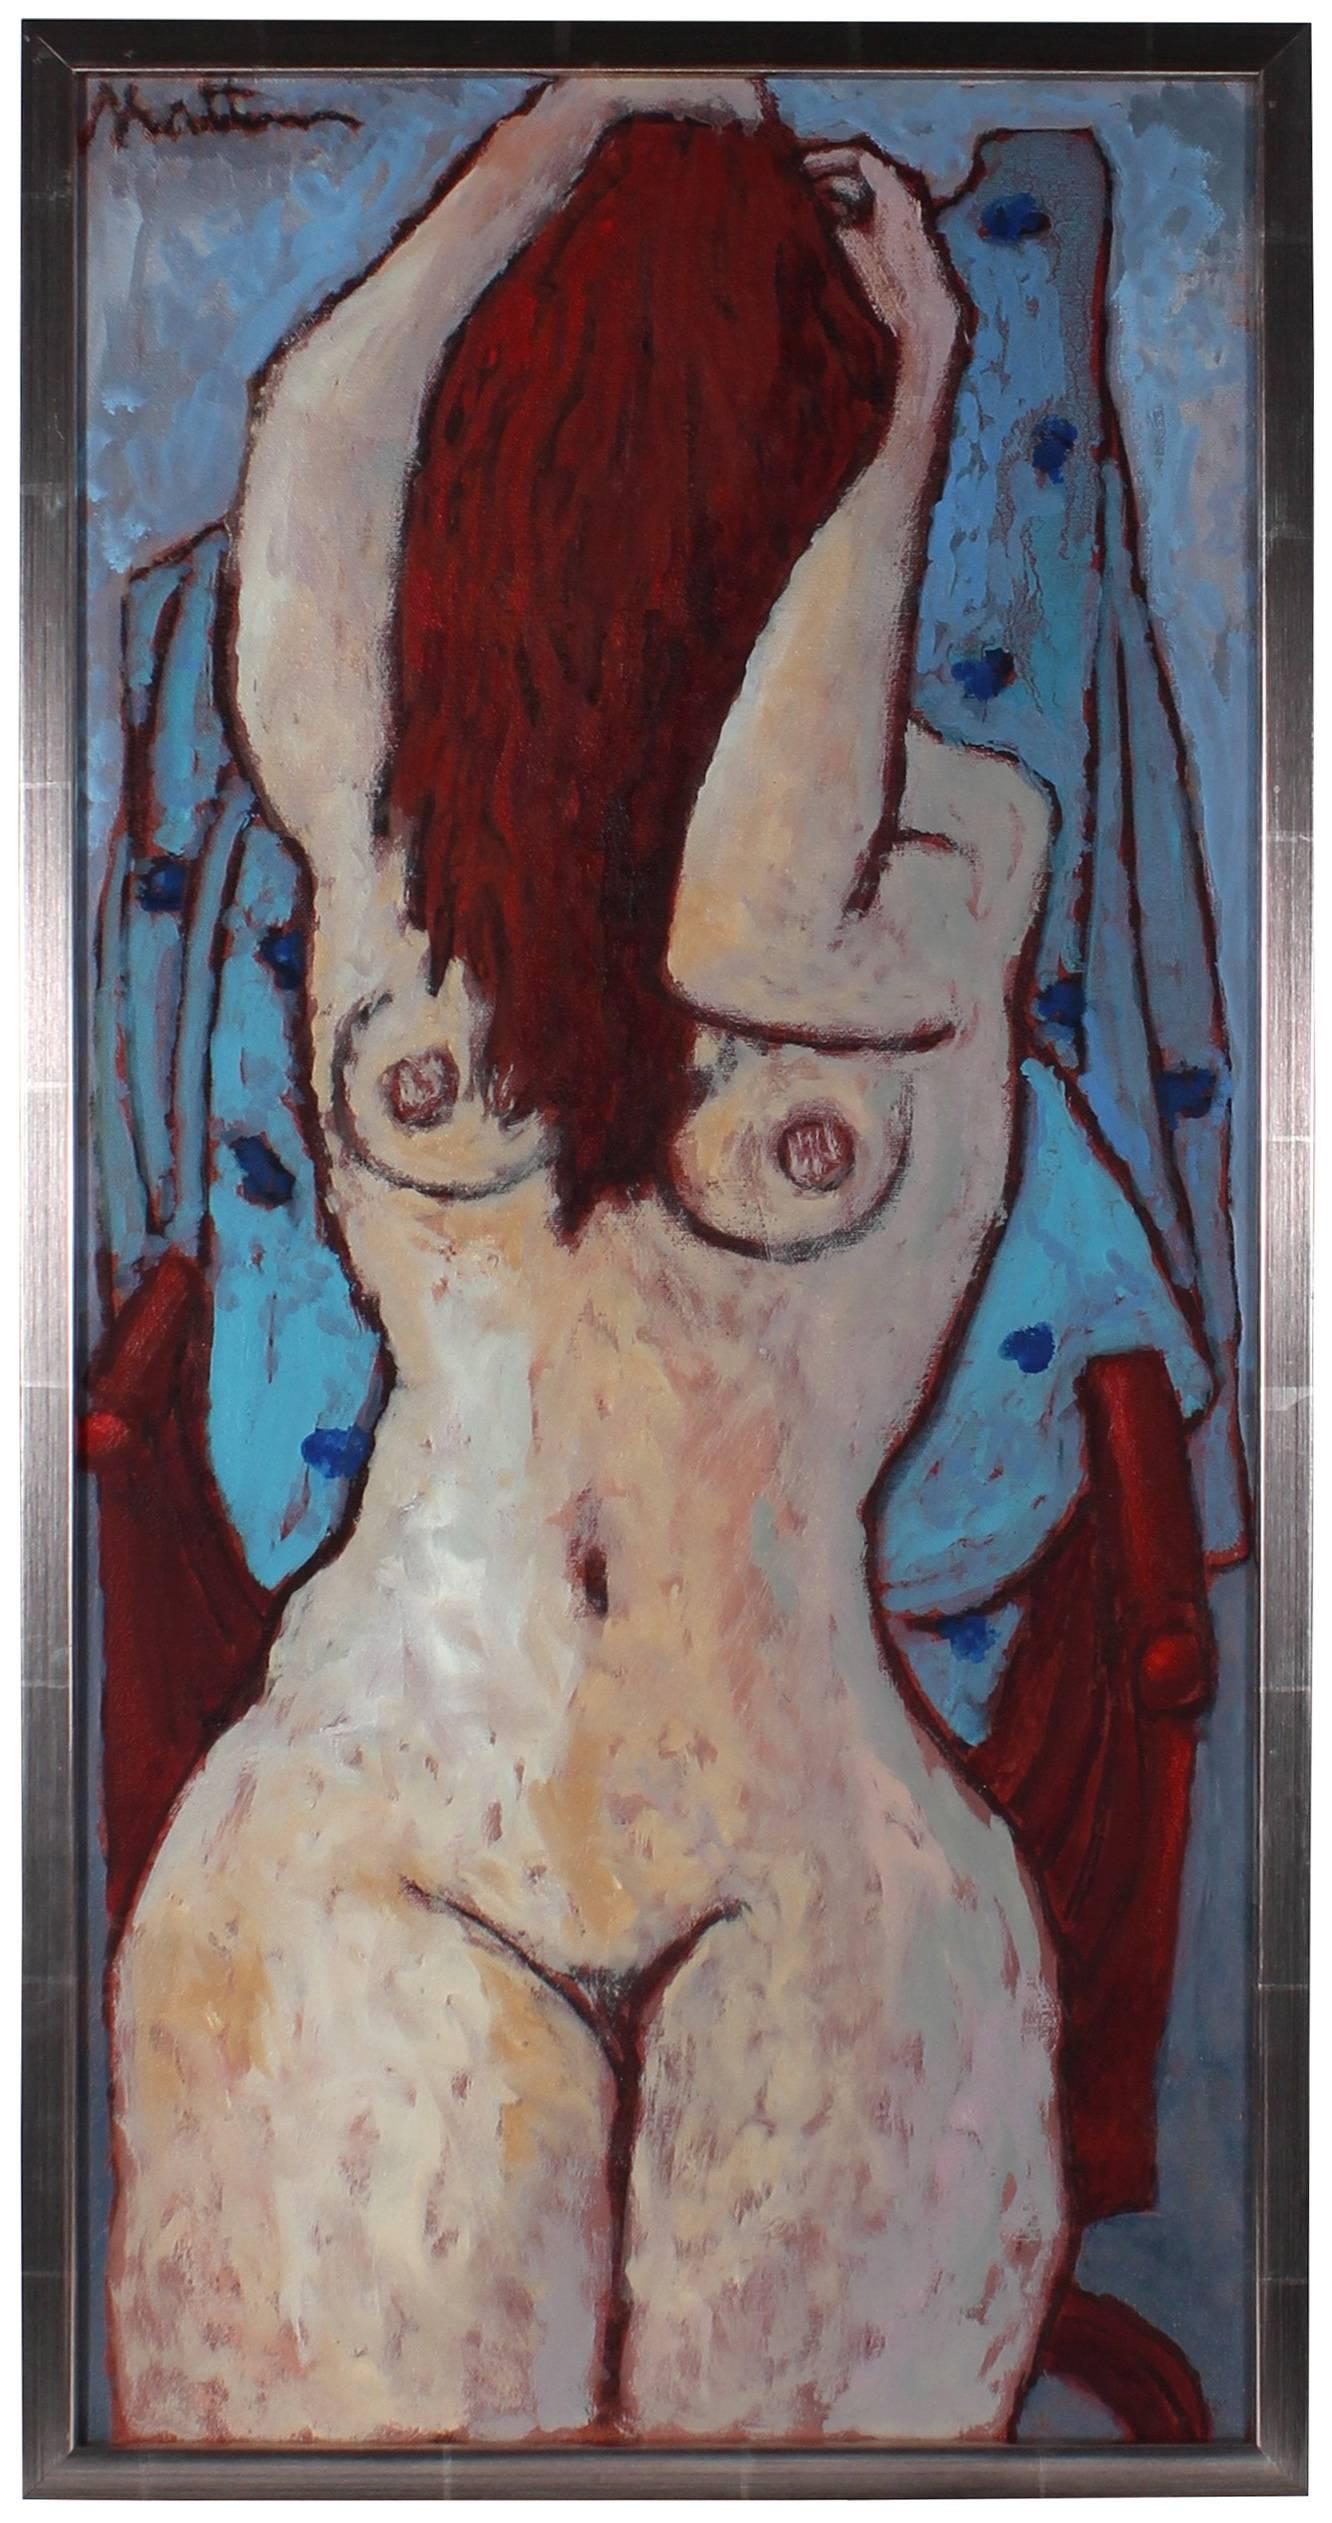 Rip Matteson Nude Painting - "Transient" Modernist Figurative Oil Painting, 2007